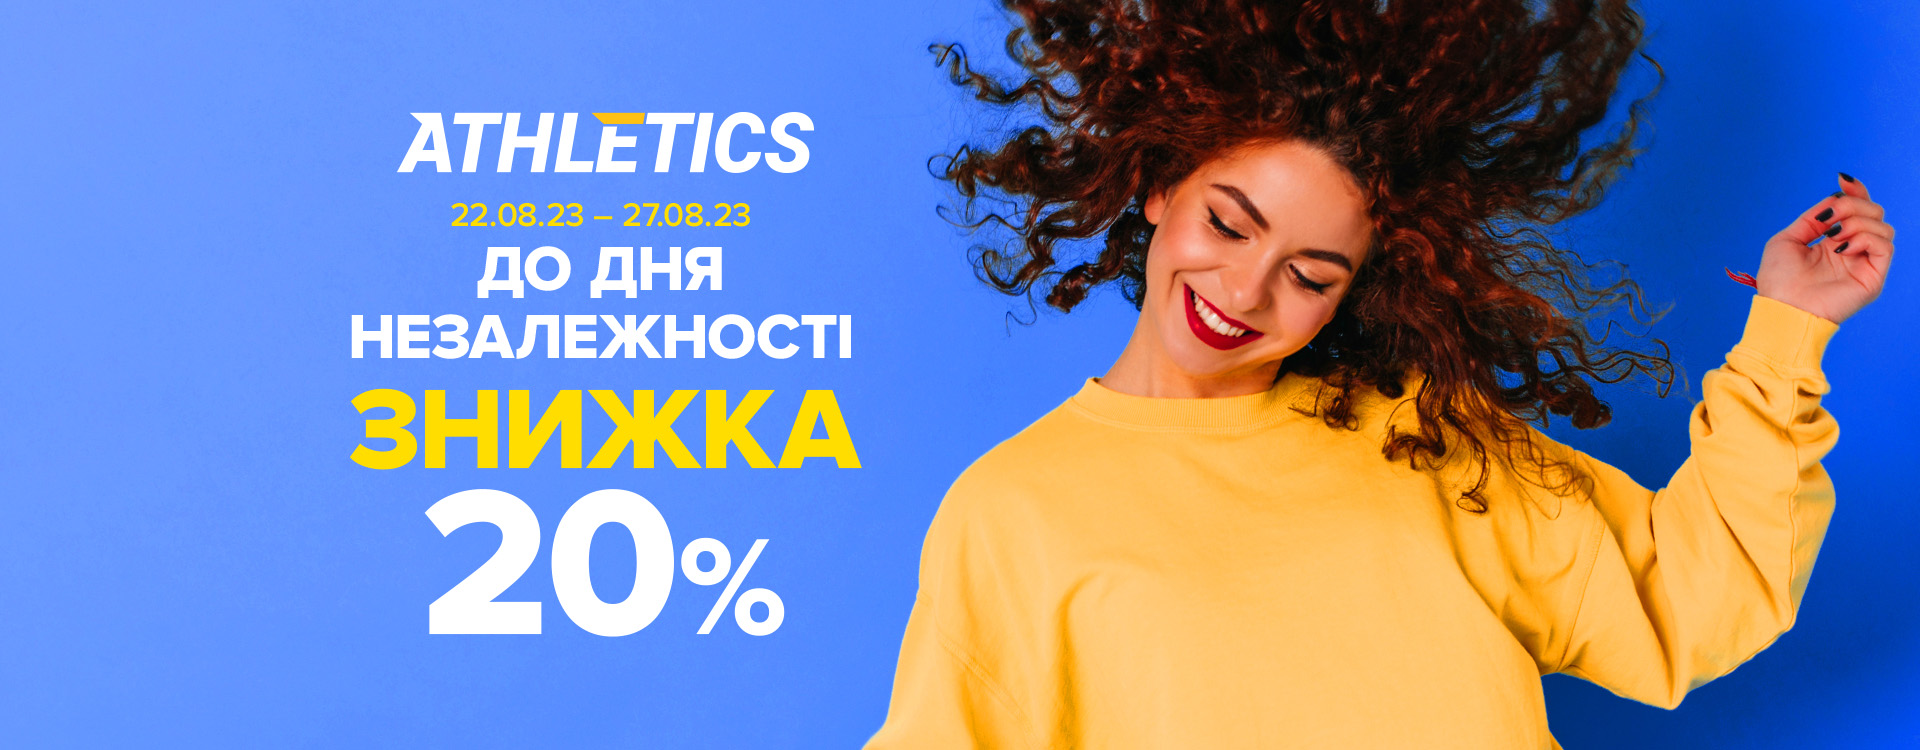 Additional 20% discount at ATHLETICS